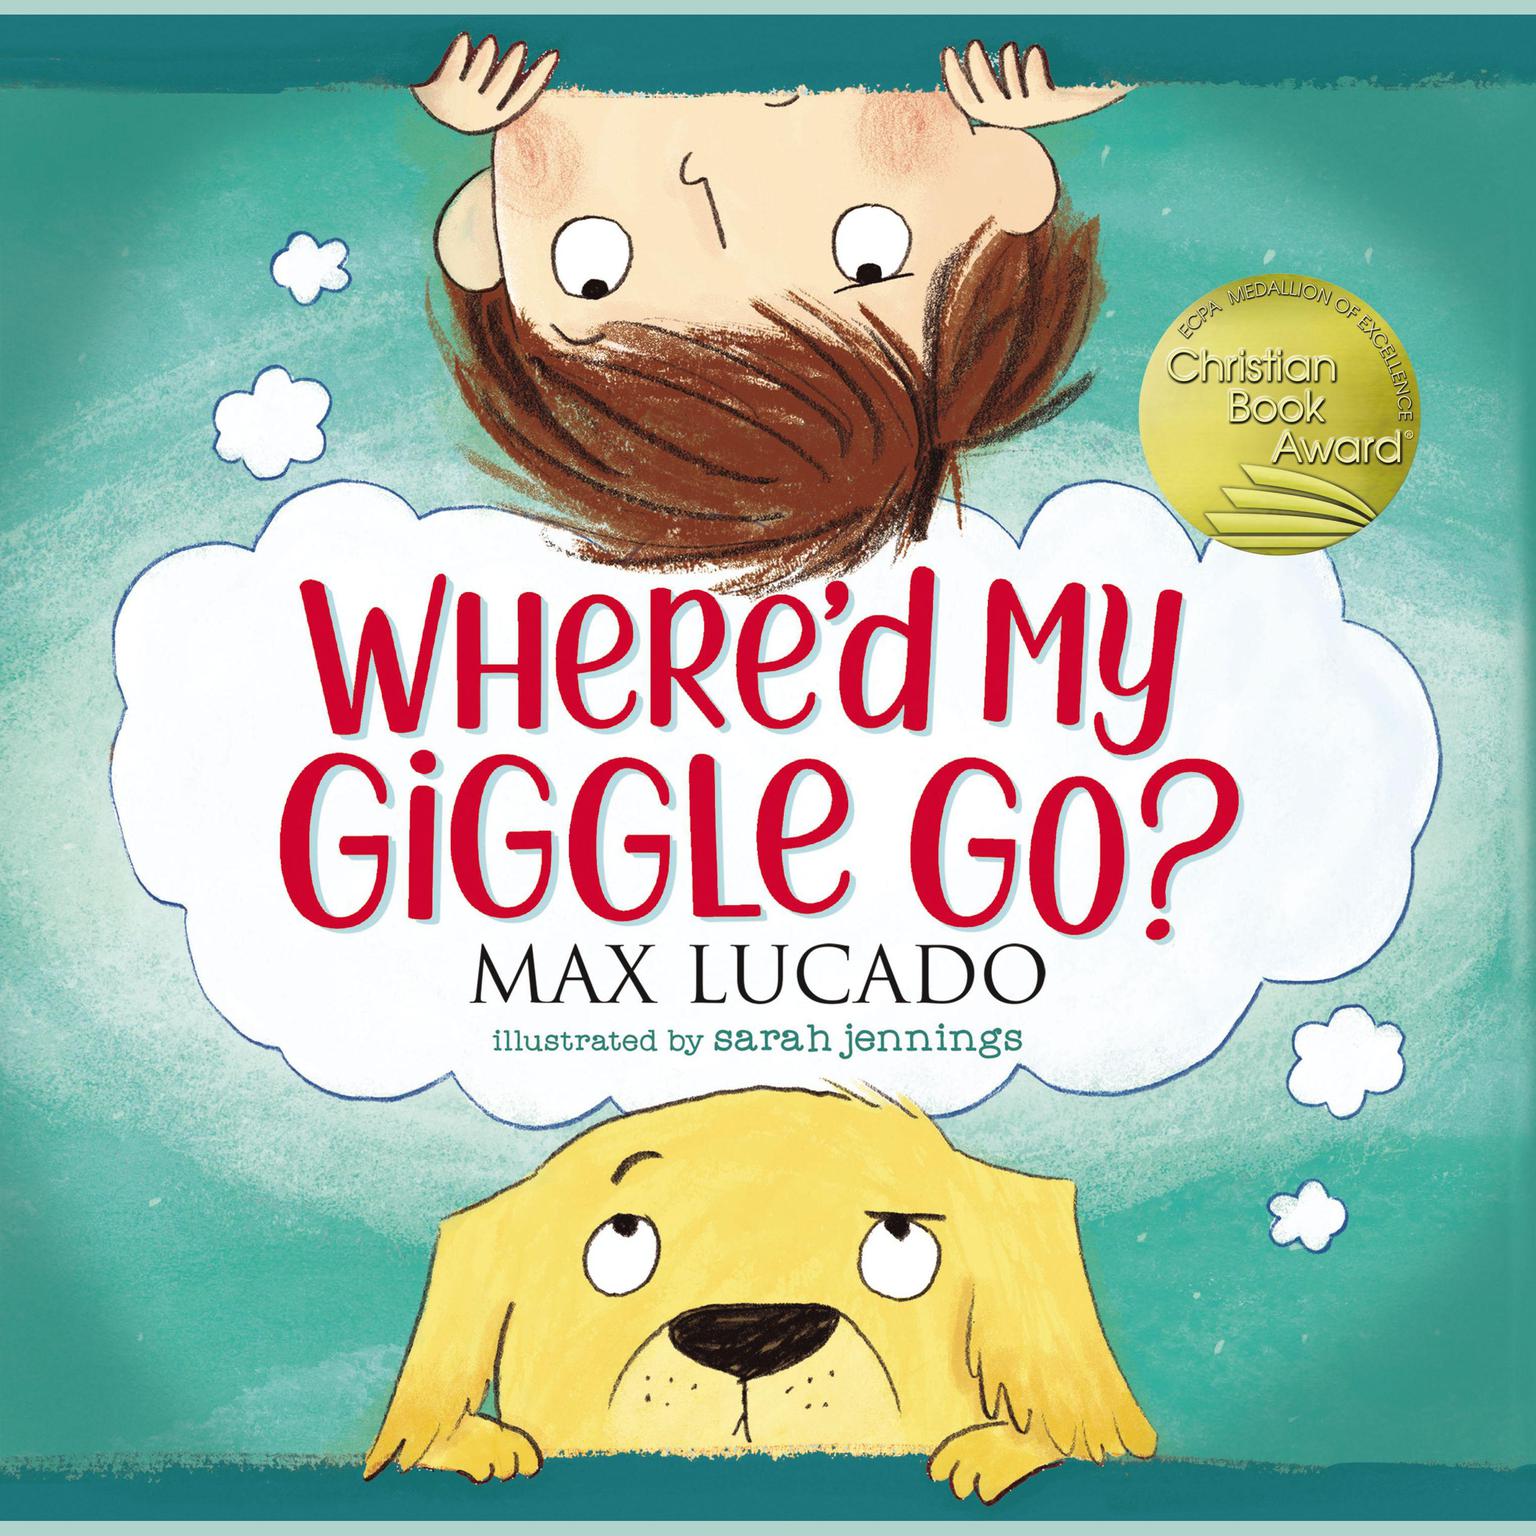 Whered My Giggle Go? Audiobook, by Max Lucado